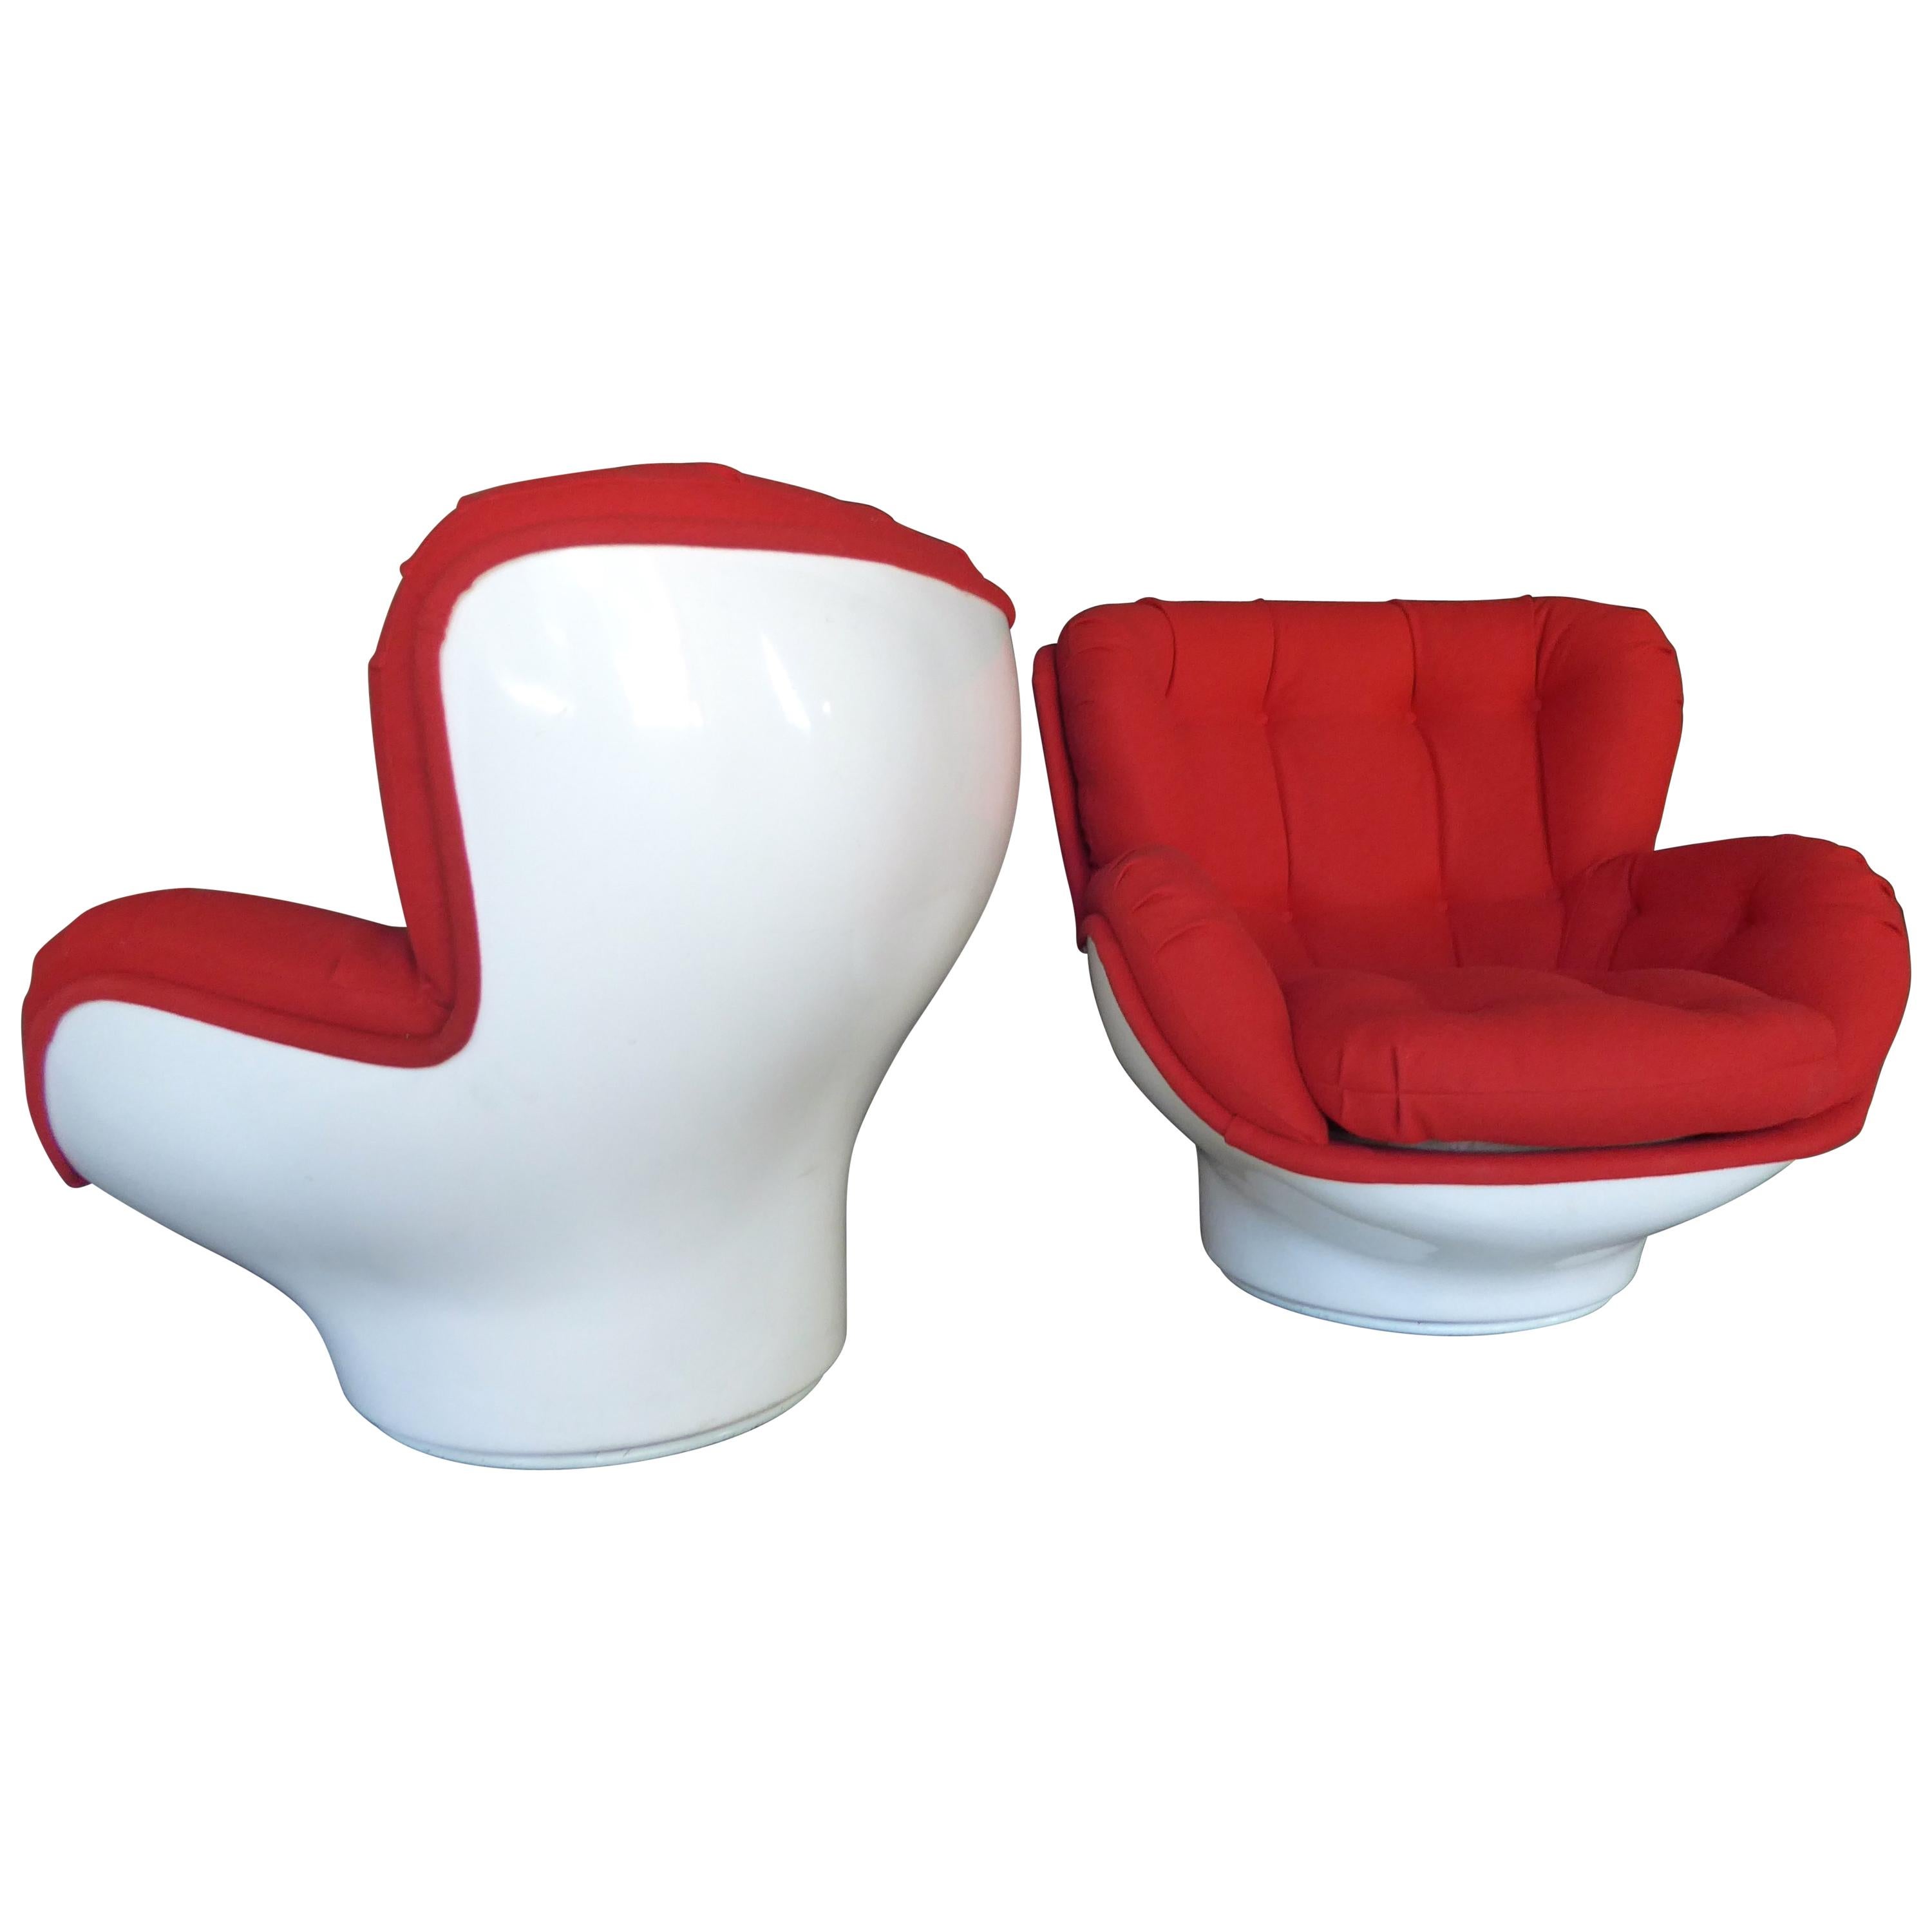 Pair of "Karate" Chairs by Michel Cadestin for Airborne